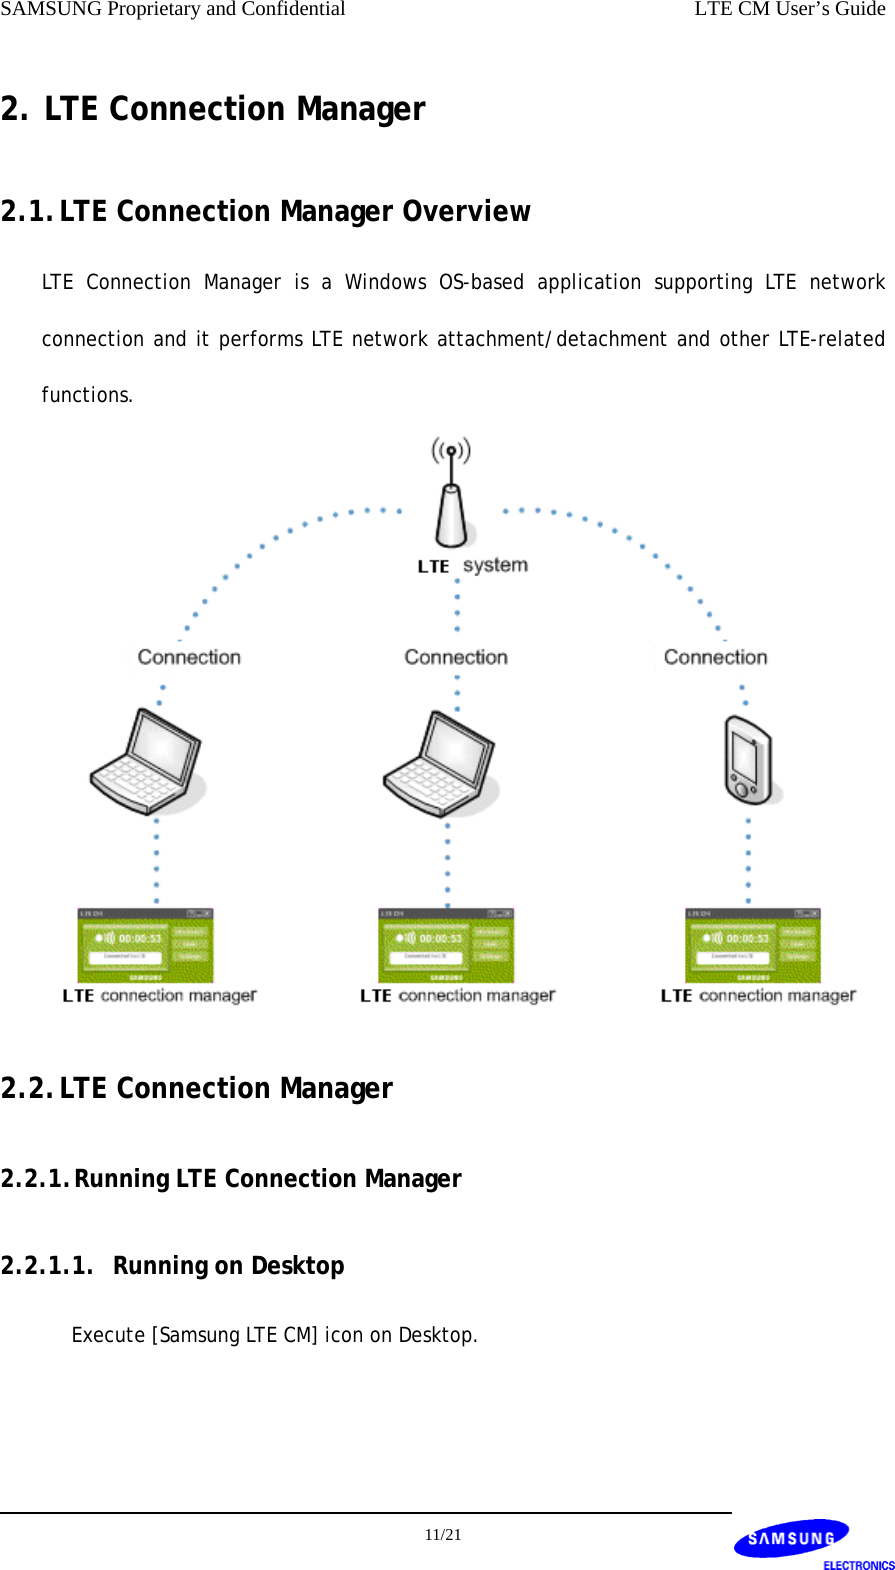 SAMSUNG Proprietary and Confidential    LTE CM User’s Guide 2. LTE Connection Manager 2.1. LTE Connection Manager Overview LTE Connection Manager is a Windows OS-based application supporting LTE network connection and it performs LTE network attachment/detachment and other LTE-related functions.  2.2. LTE Connection Manager 2.2.1. Running LTE Connection Manager 2.2.1.1. Running on Desktop Execute [Samsung LTE CM] icon on Desktop.  11/21  